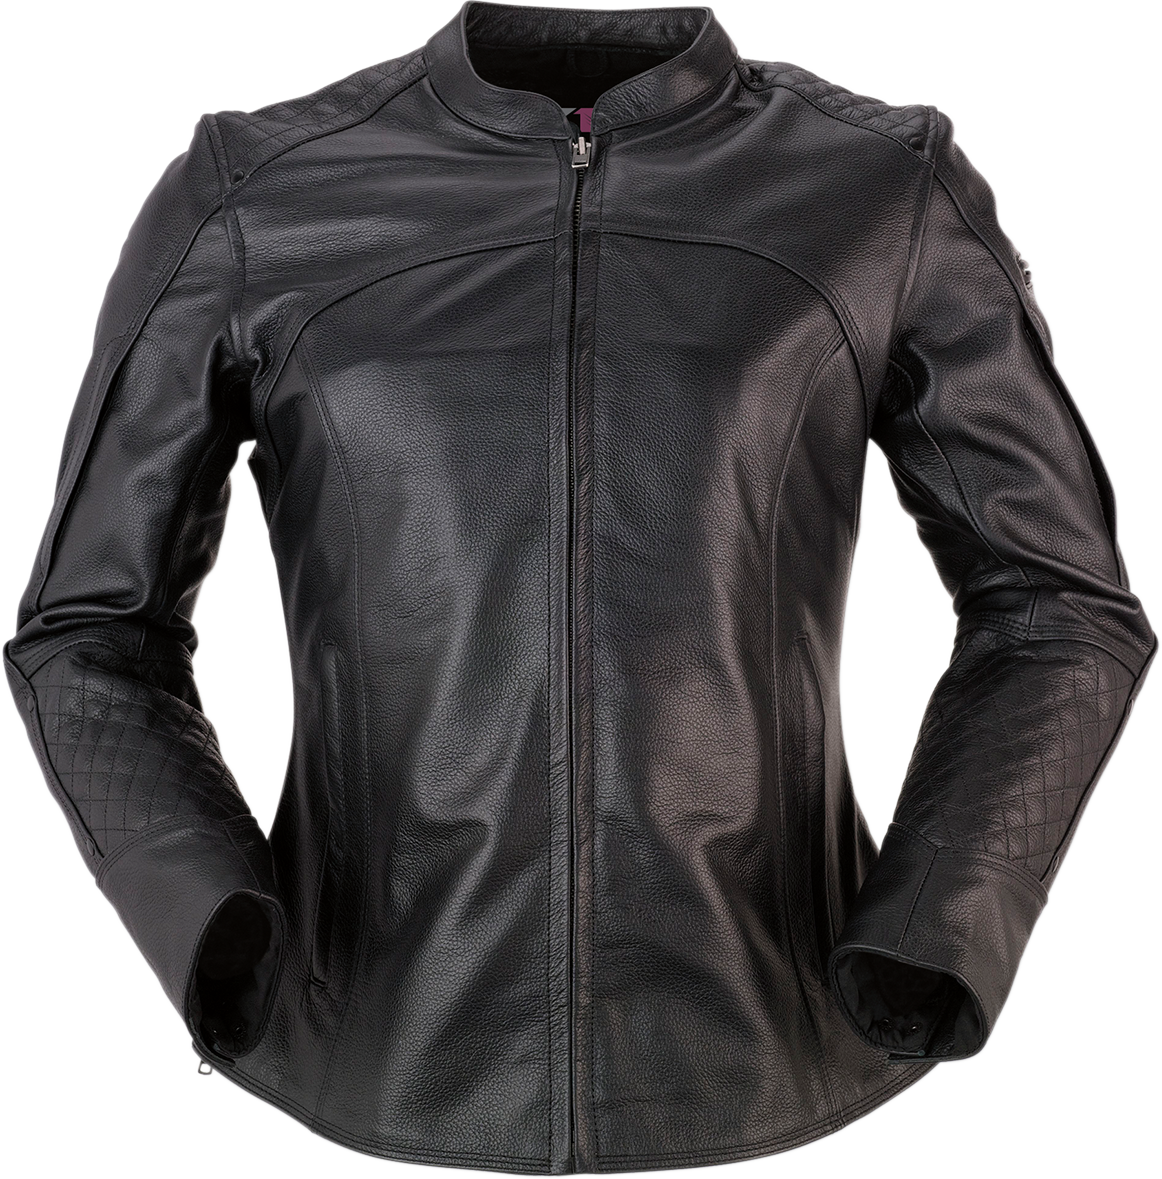 z1r jackets  35 special  leather - motorcycle